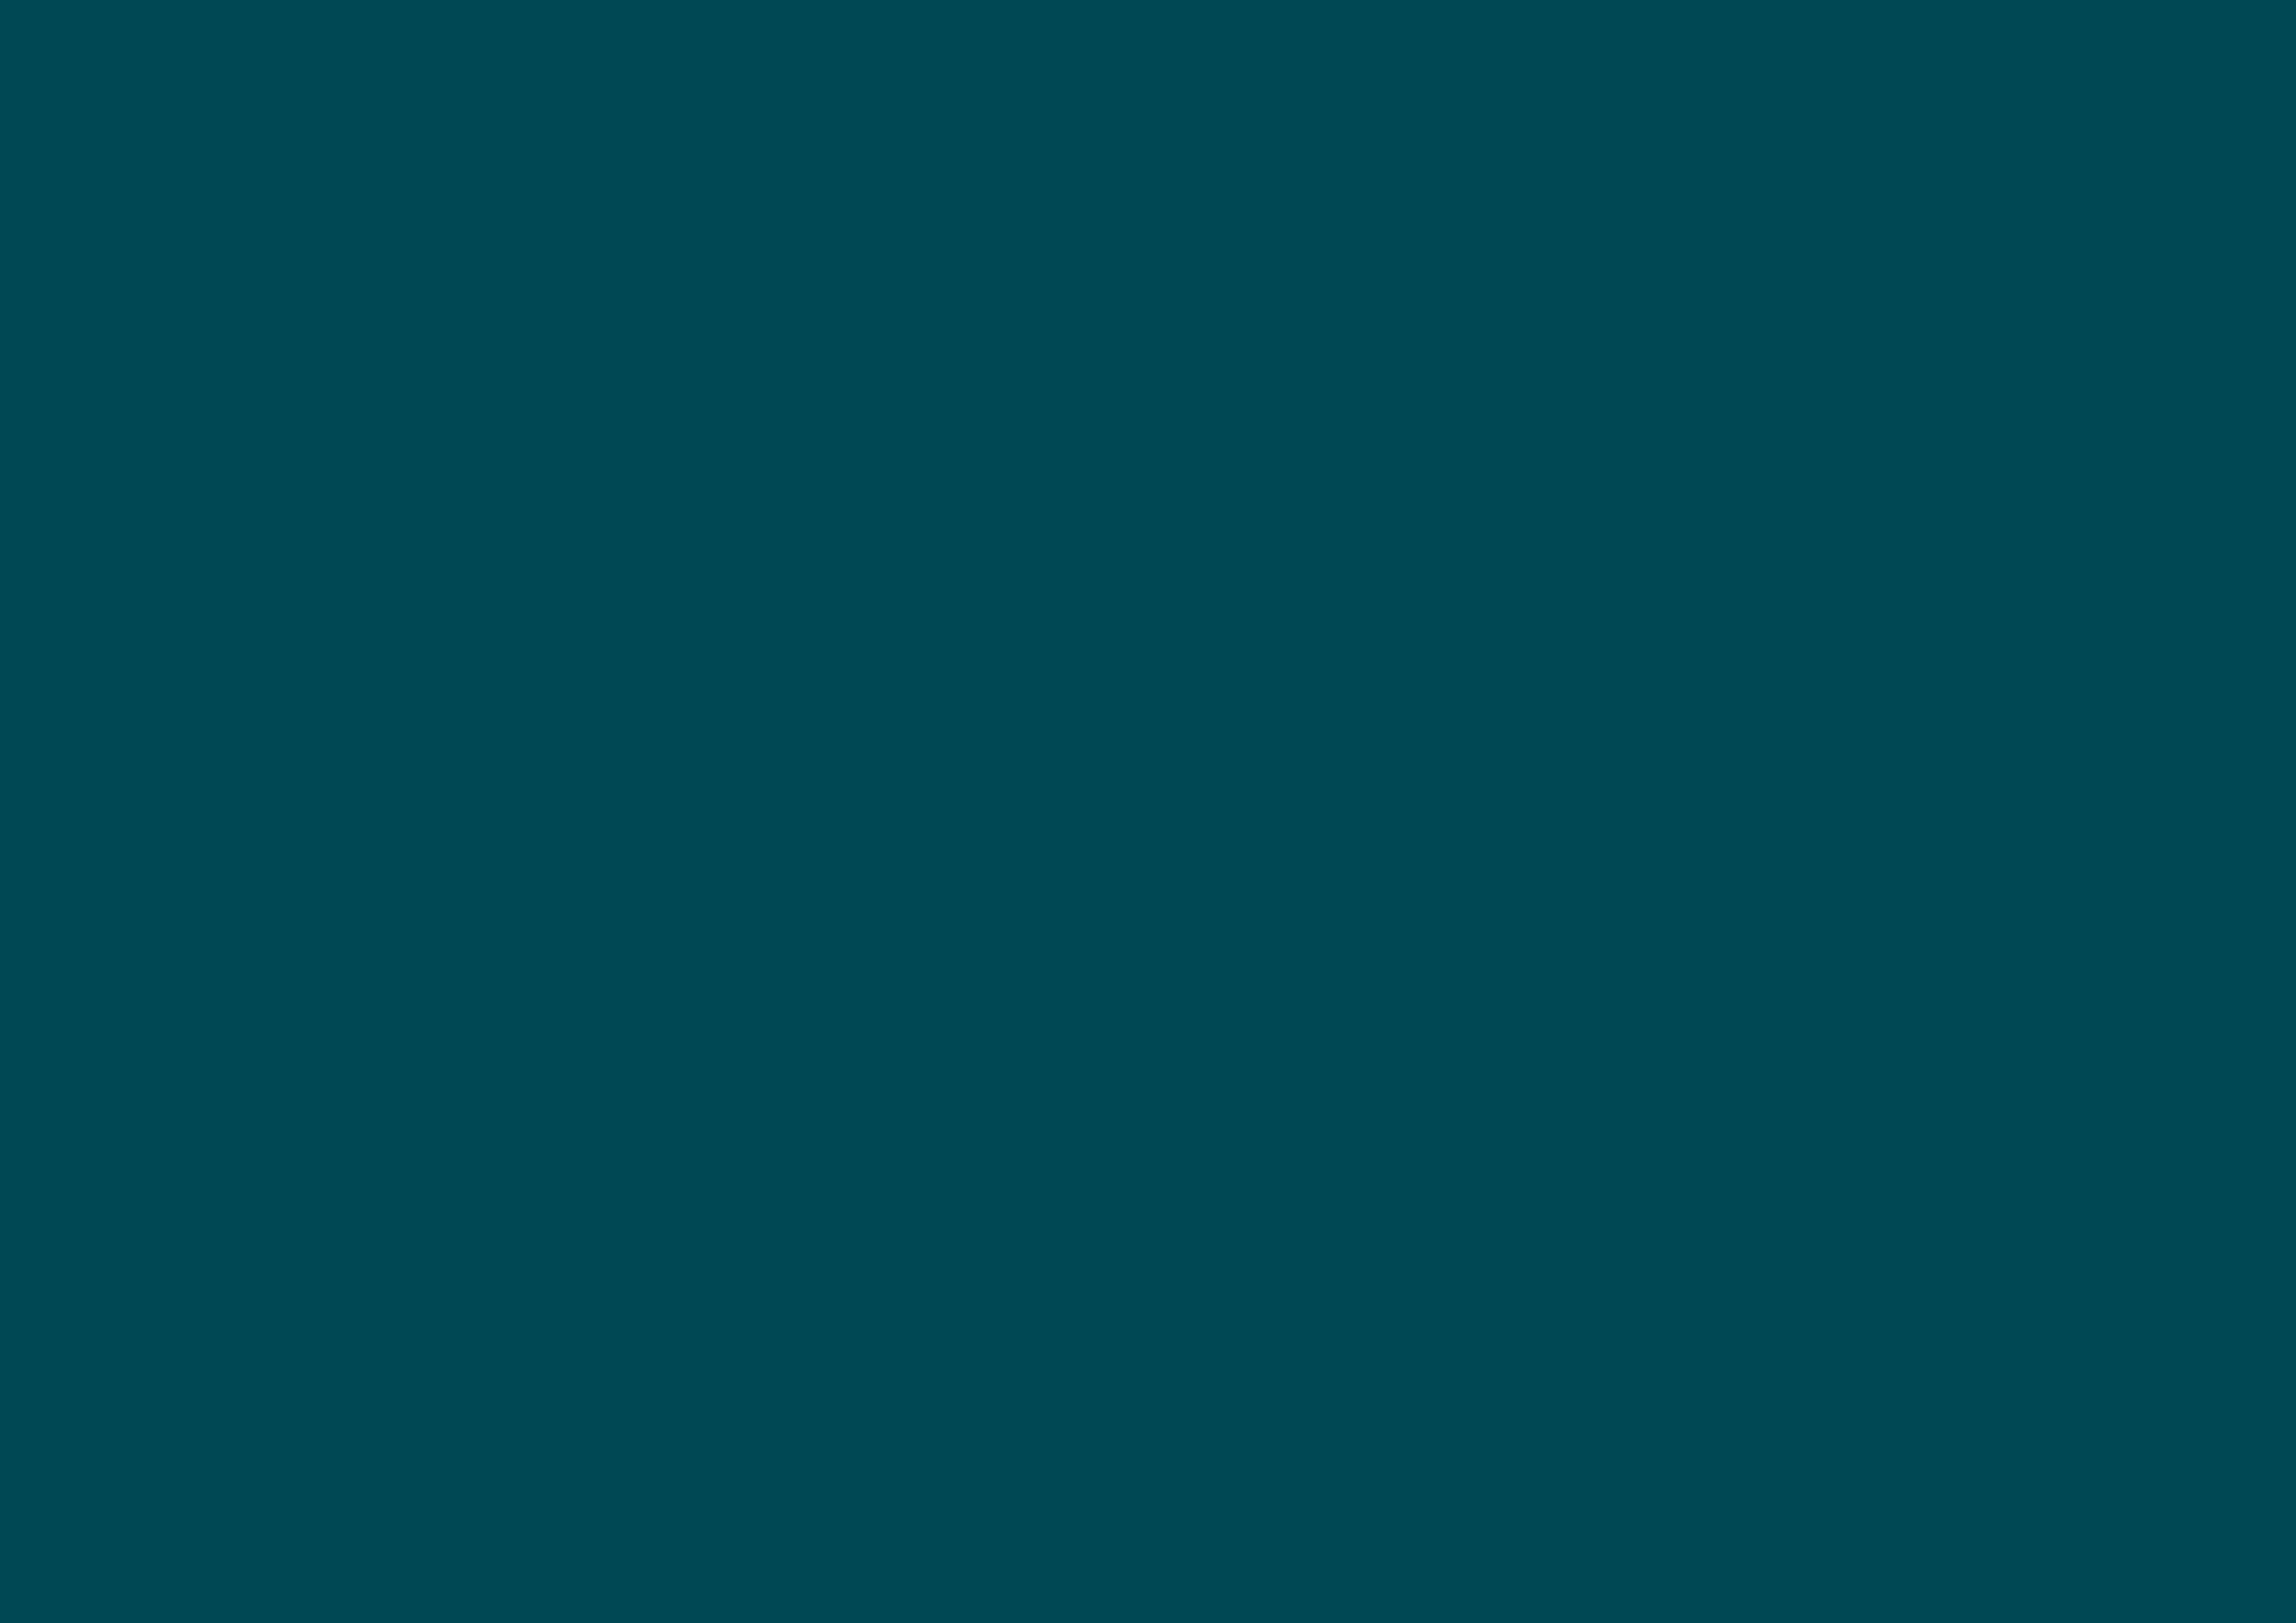 3508x2480 Midnight Green Solid Color Background